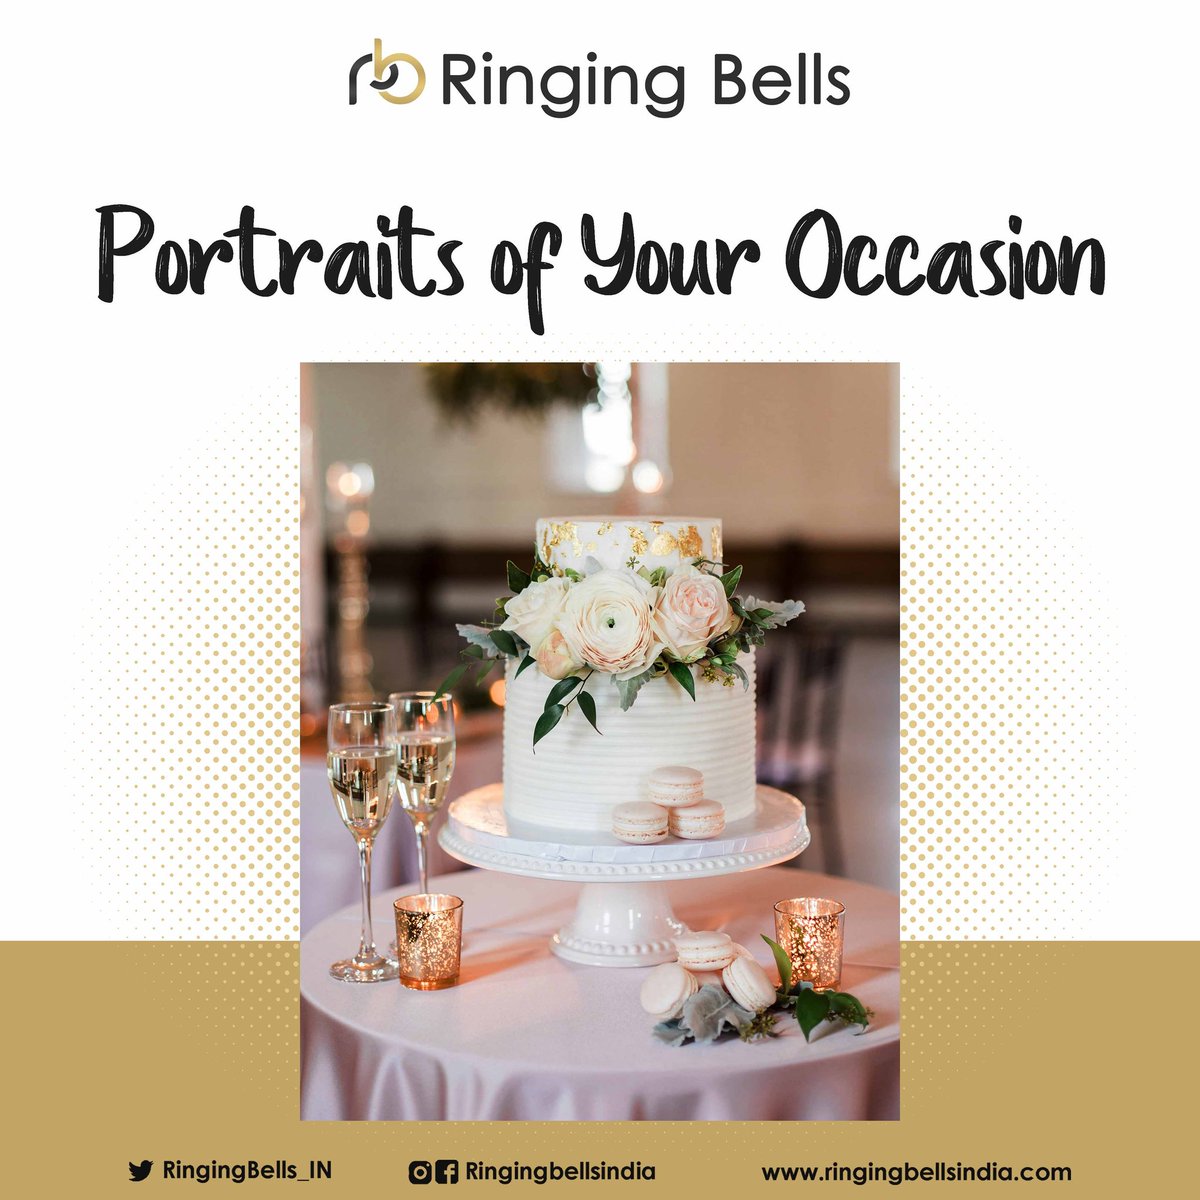 Looking for wedding bakers?
Get the best wedding cake of your choice for your big day. For bookings, visit ringingbellsindia.com today.
#ringingbellsindia #weddingcakes #weddingdeals #weddingservice #weddingvendors #indianwedding #assamesewedding #Guwahati #Assam